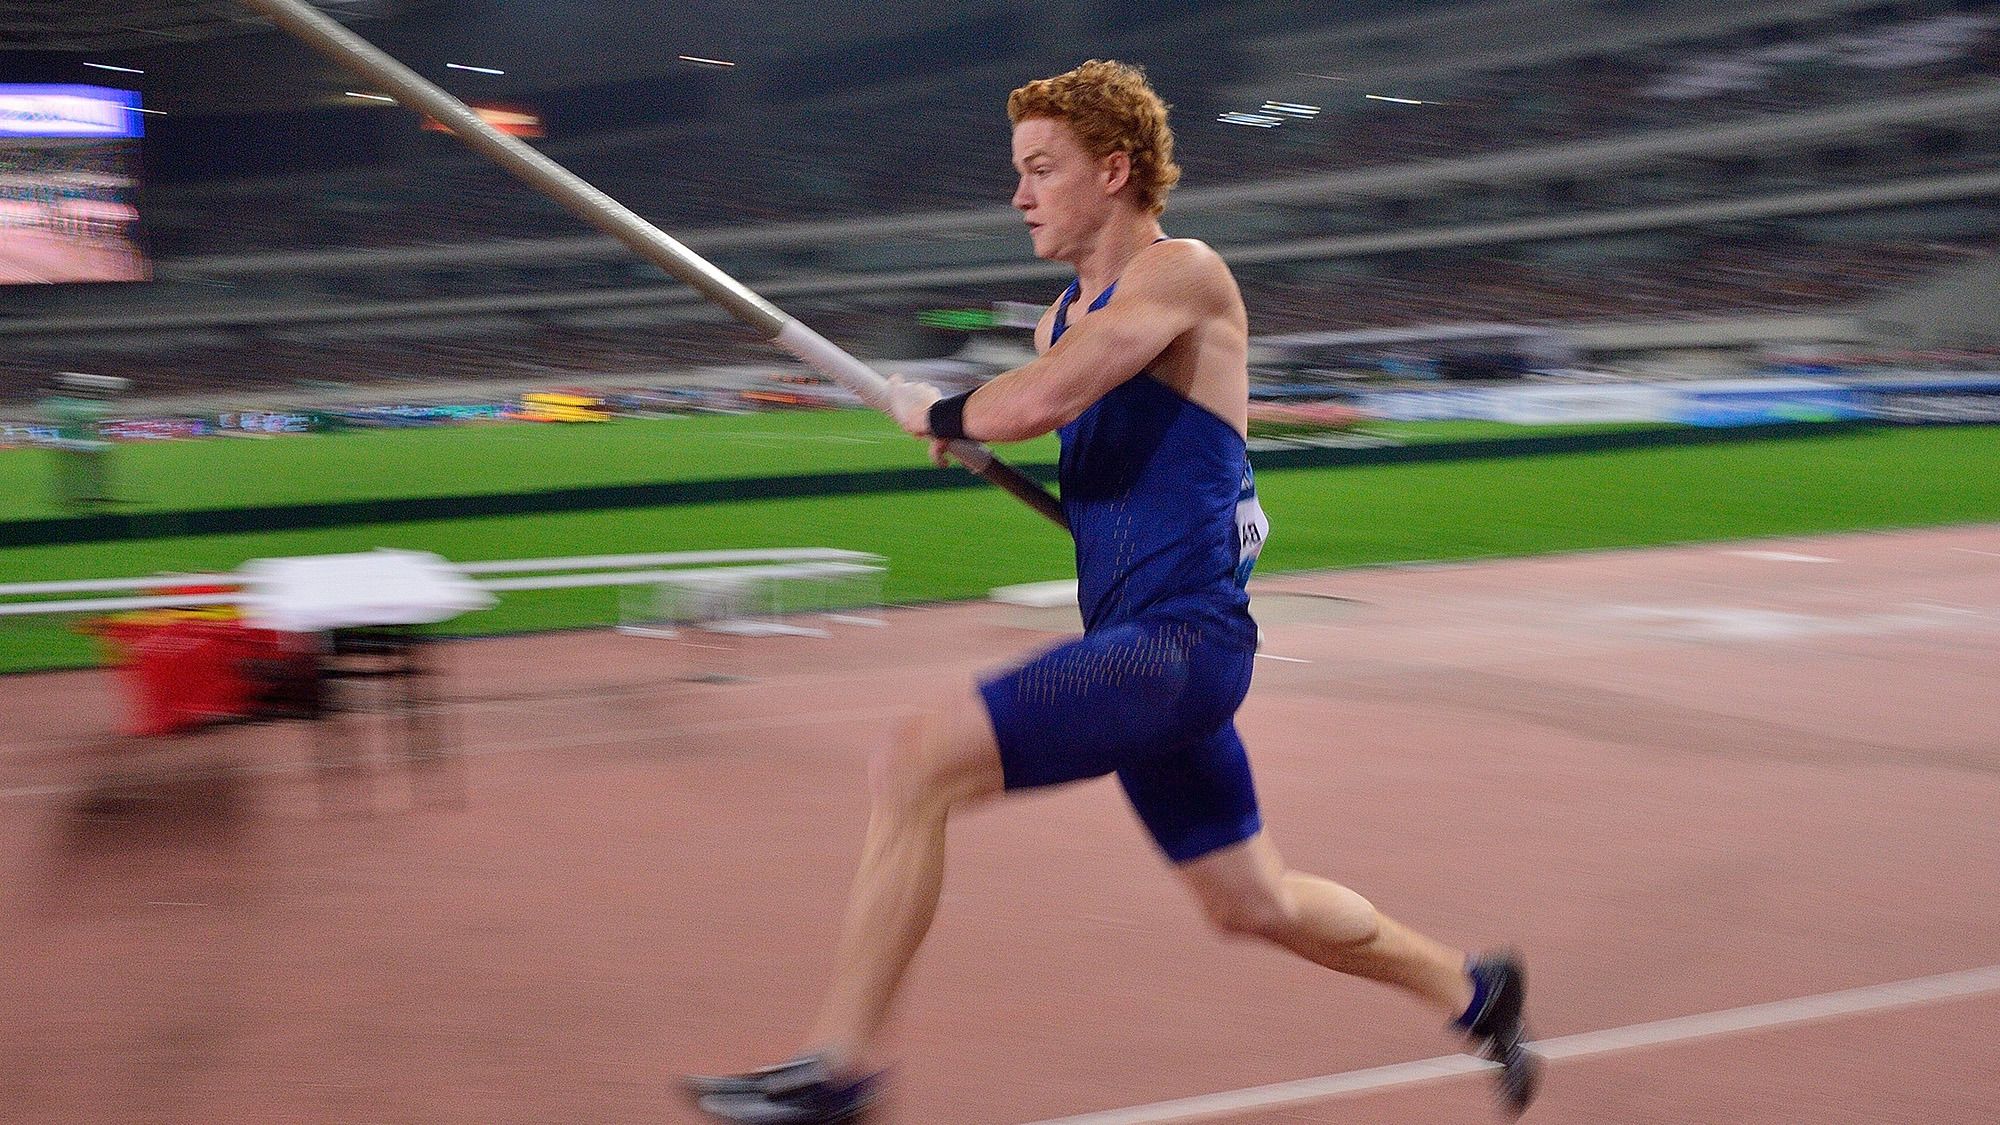 Canadian world champion pole vaulter Shawn Barber dies at 29 from medical complications